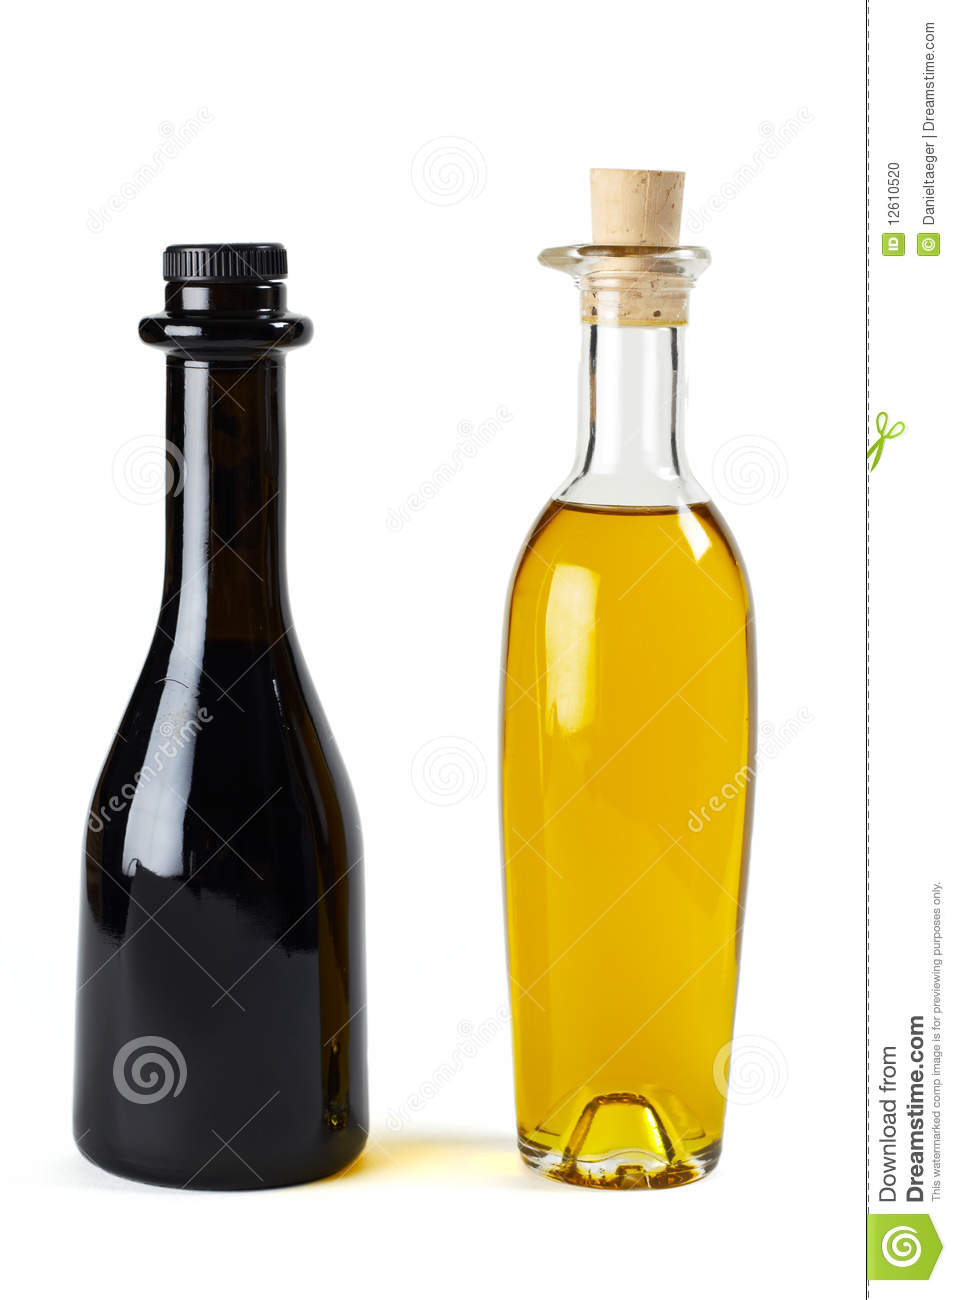 Vinegar Bottle Clipart   All The Gallery You Need